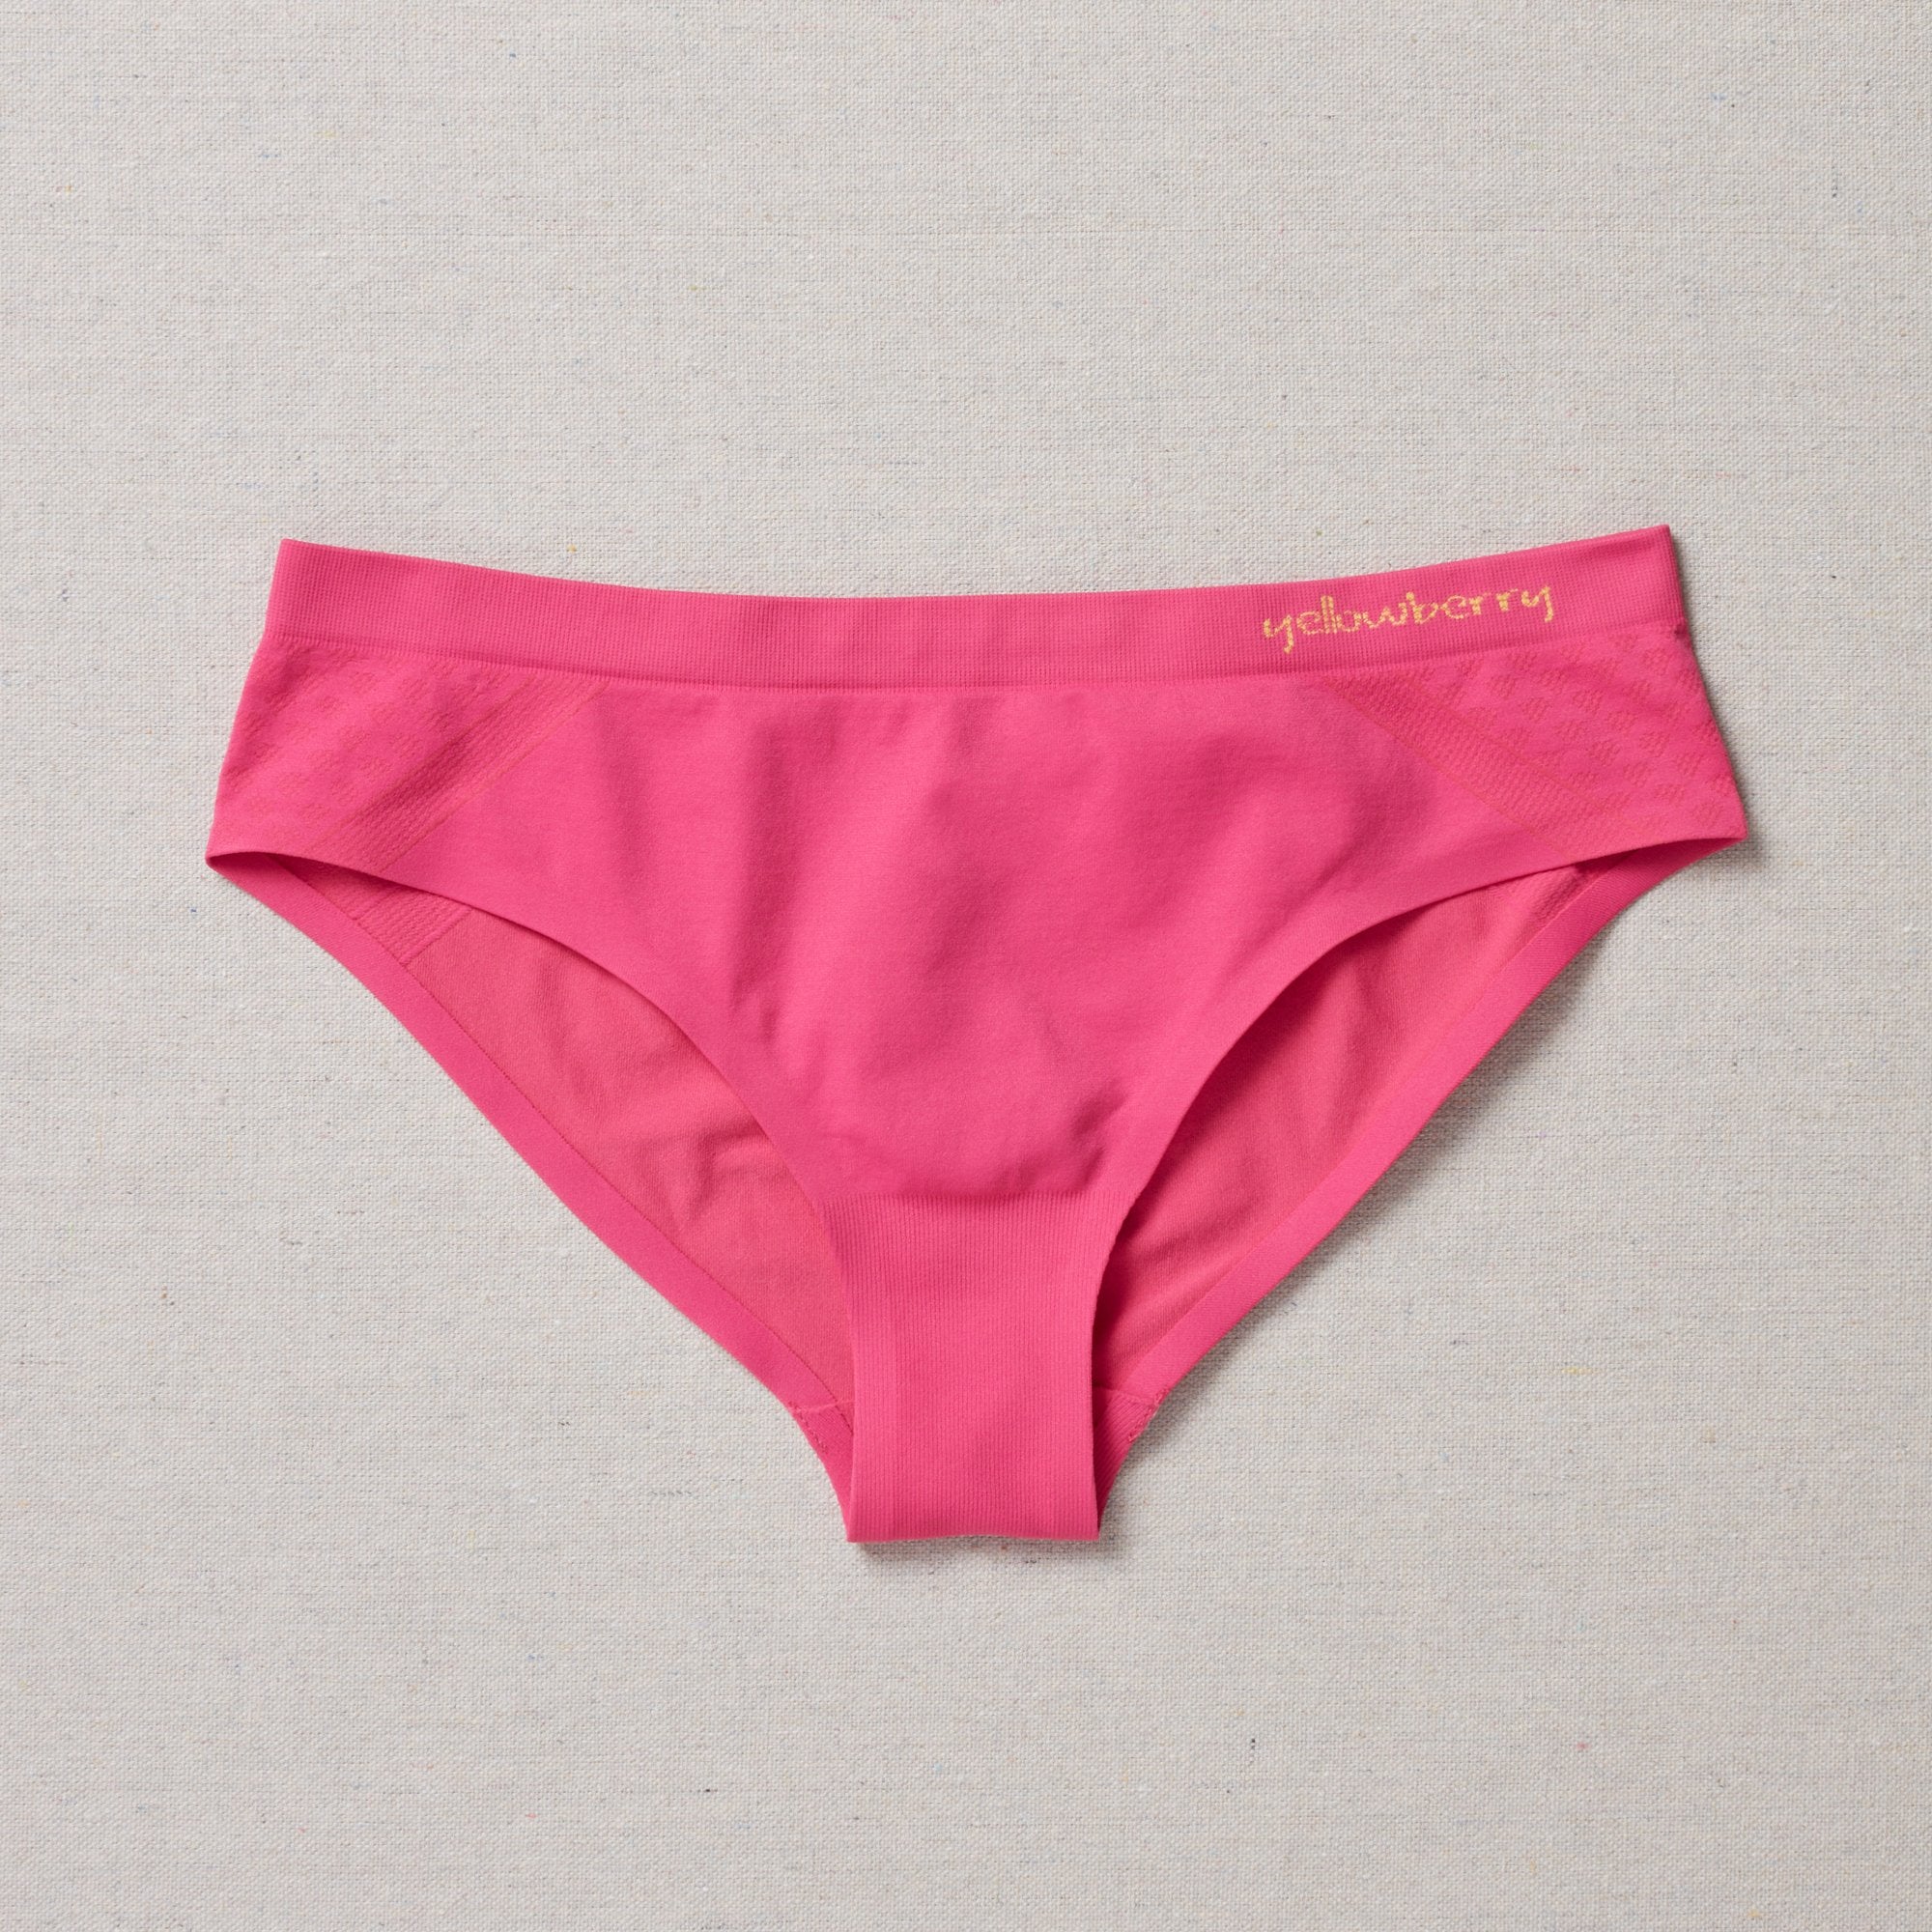 Prevent Rolling Down With High-Waisted Seamless Underwear: A Simple Gu -  Yellowberry